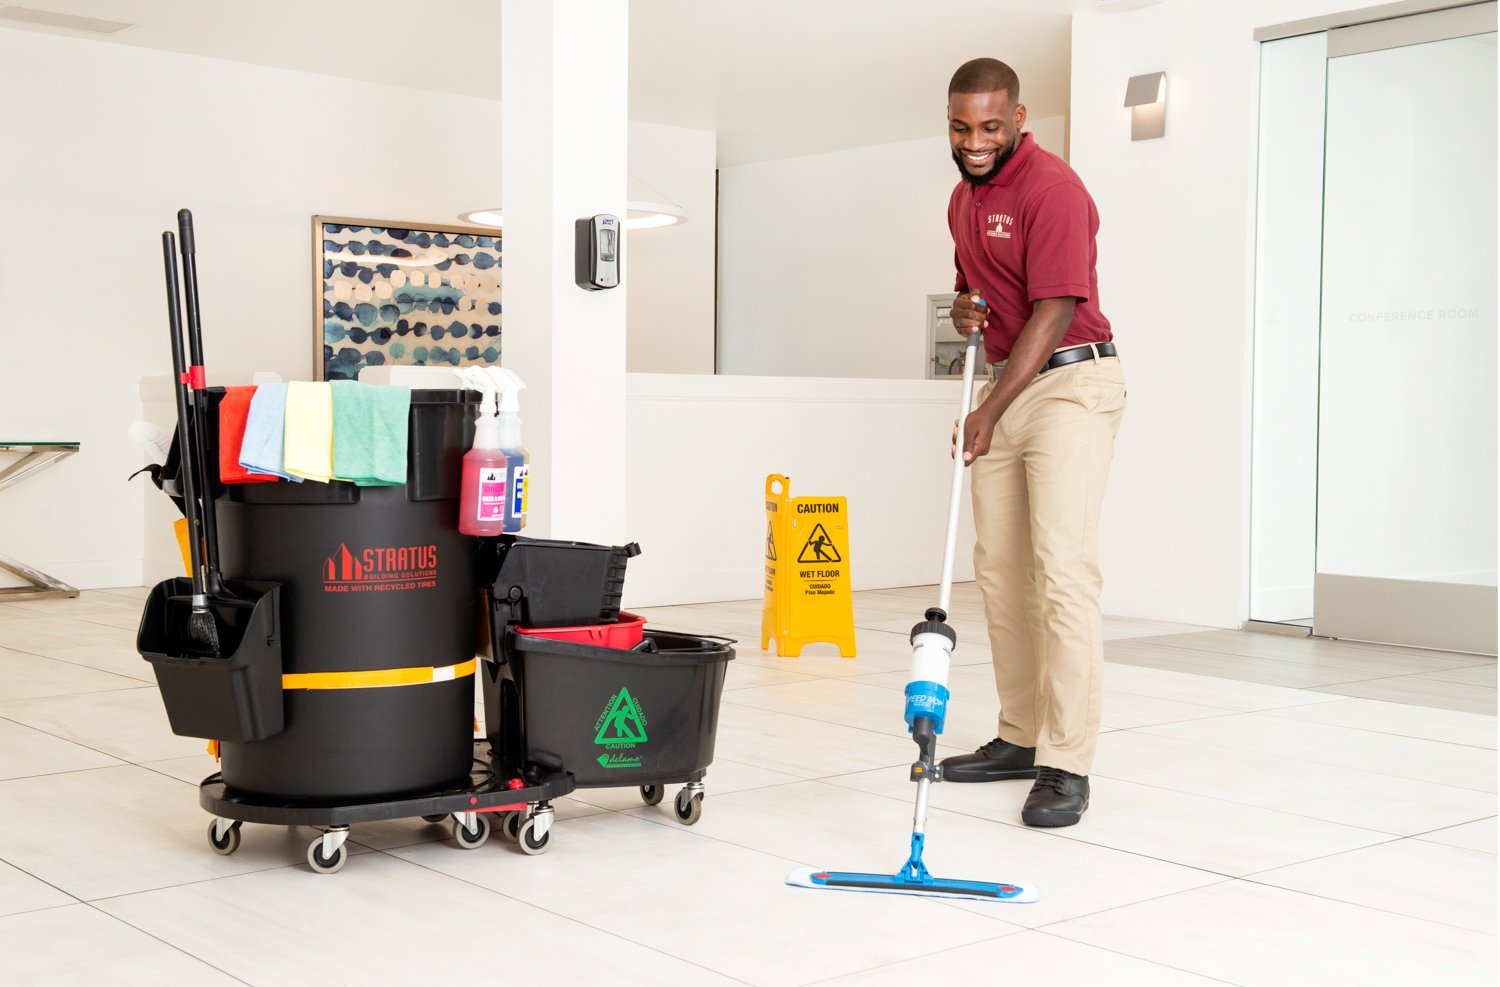 Stratus Franchisee Cleaning the Floor with a Mop and Mop Bucket